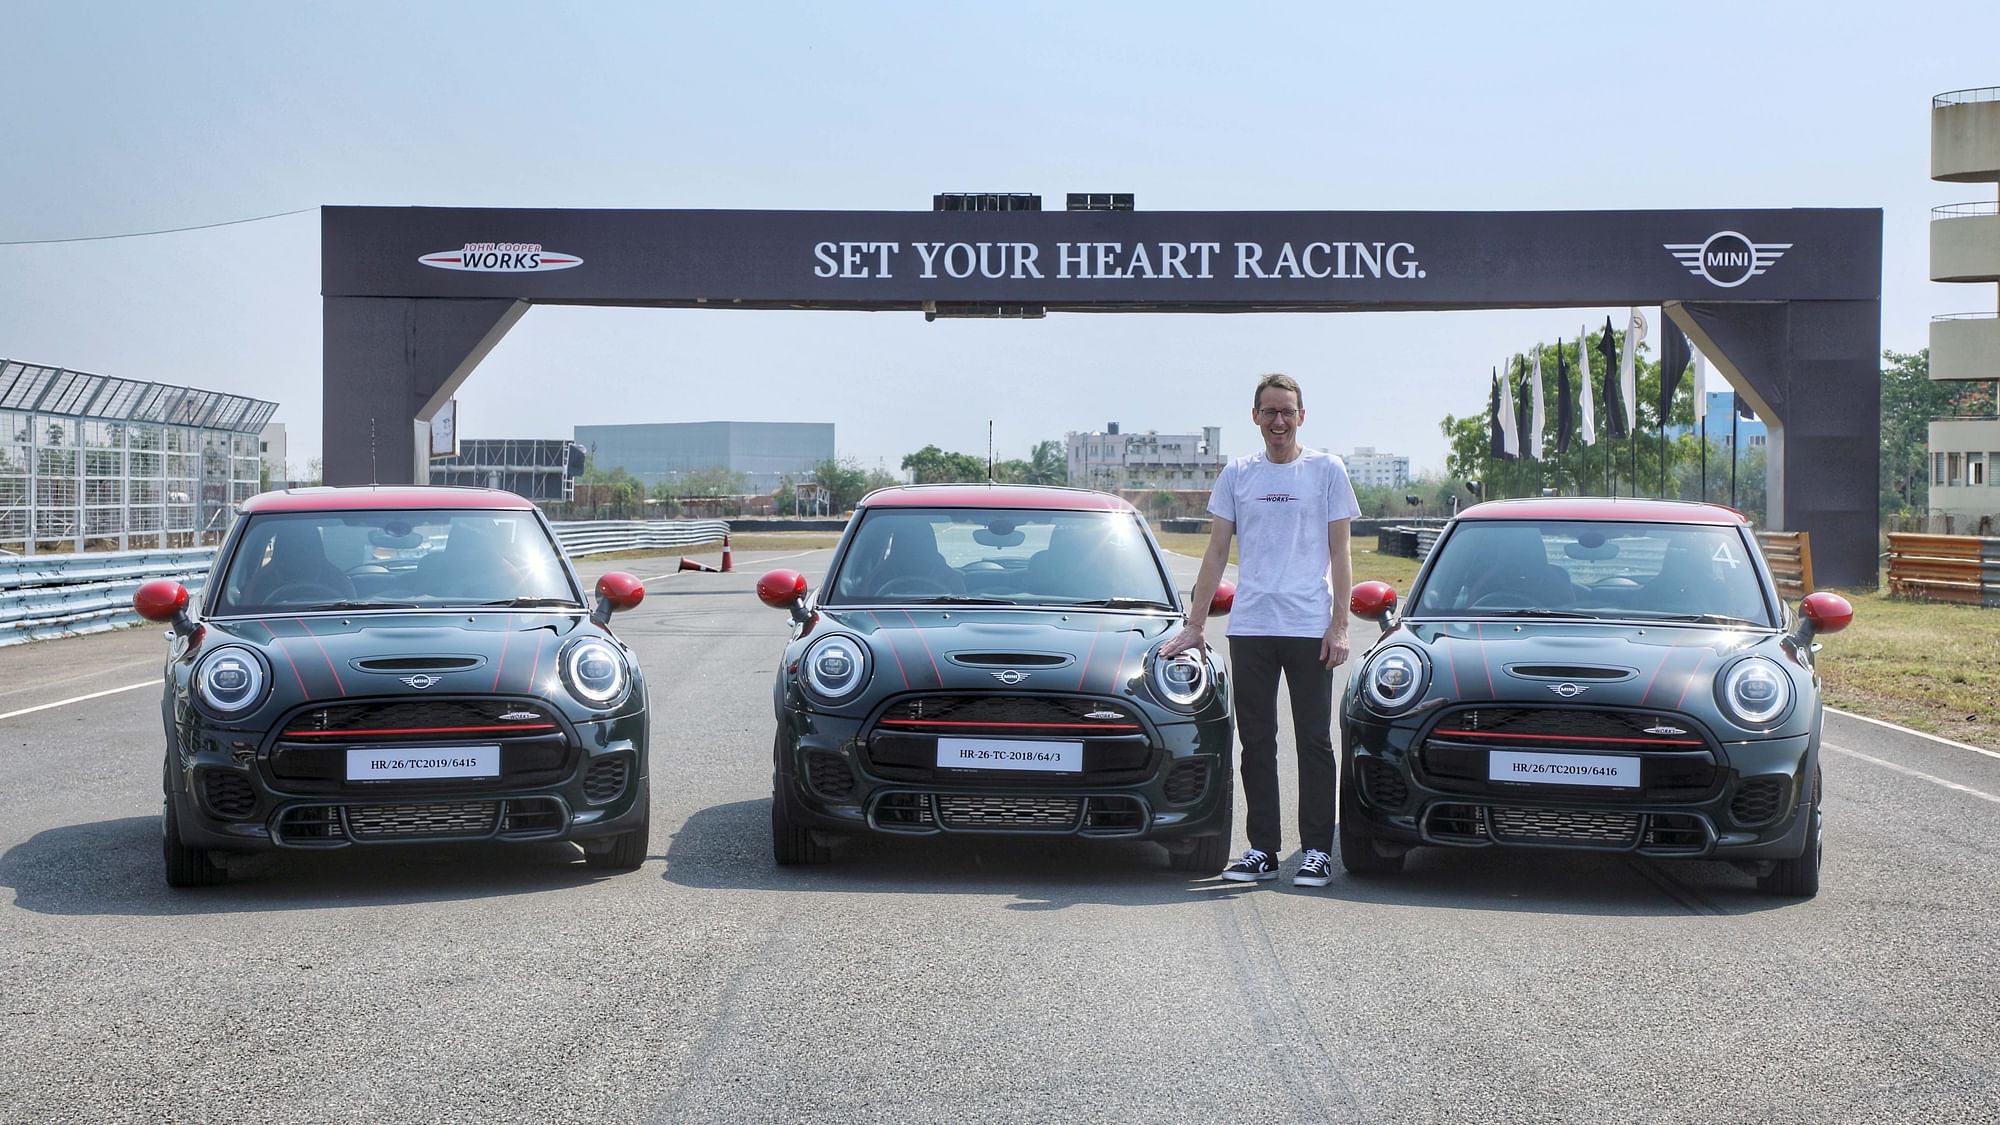 The new Mini John Cooper Works launched in India.